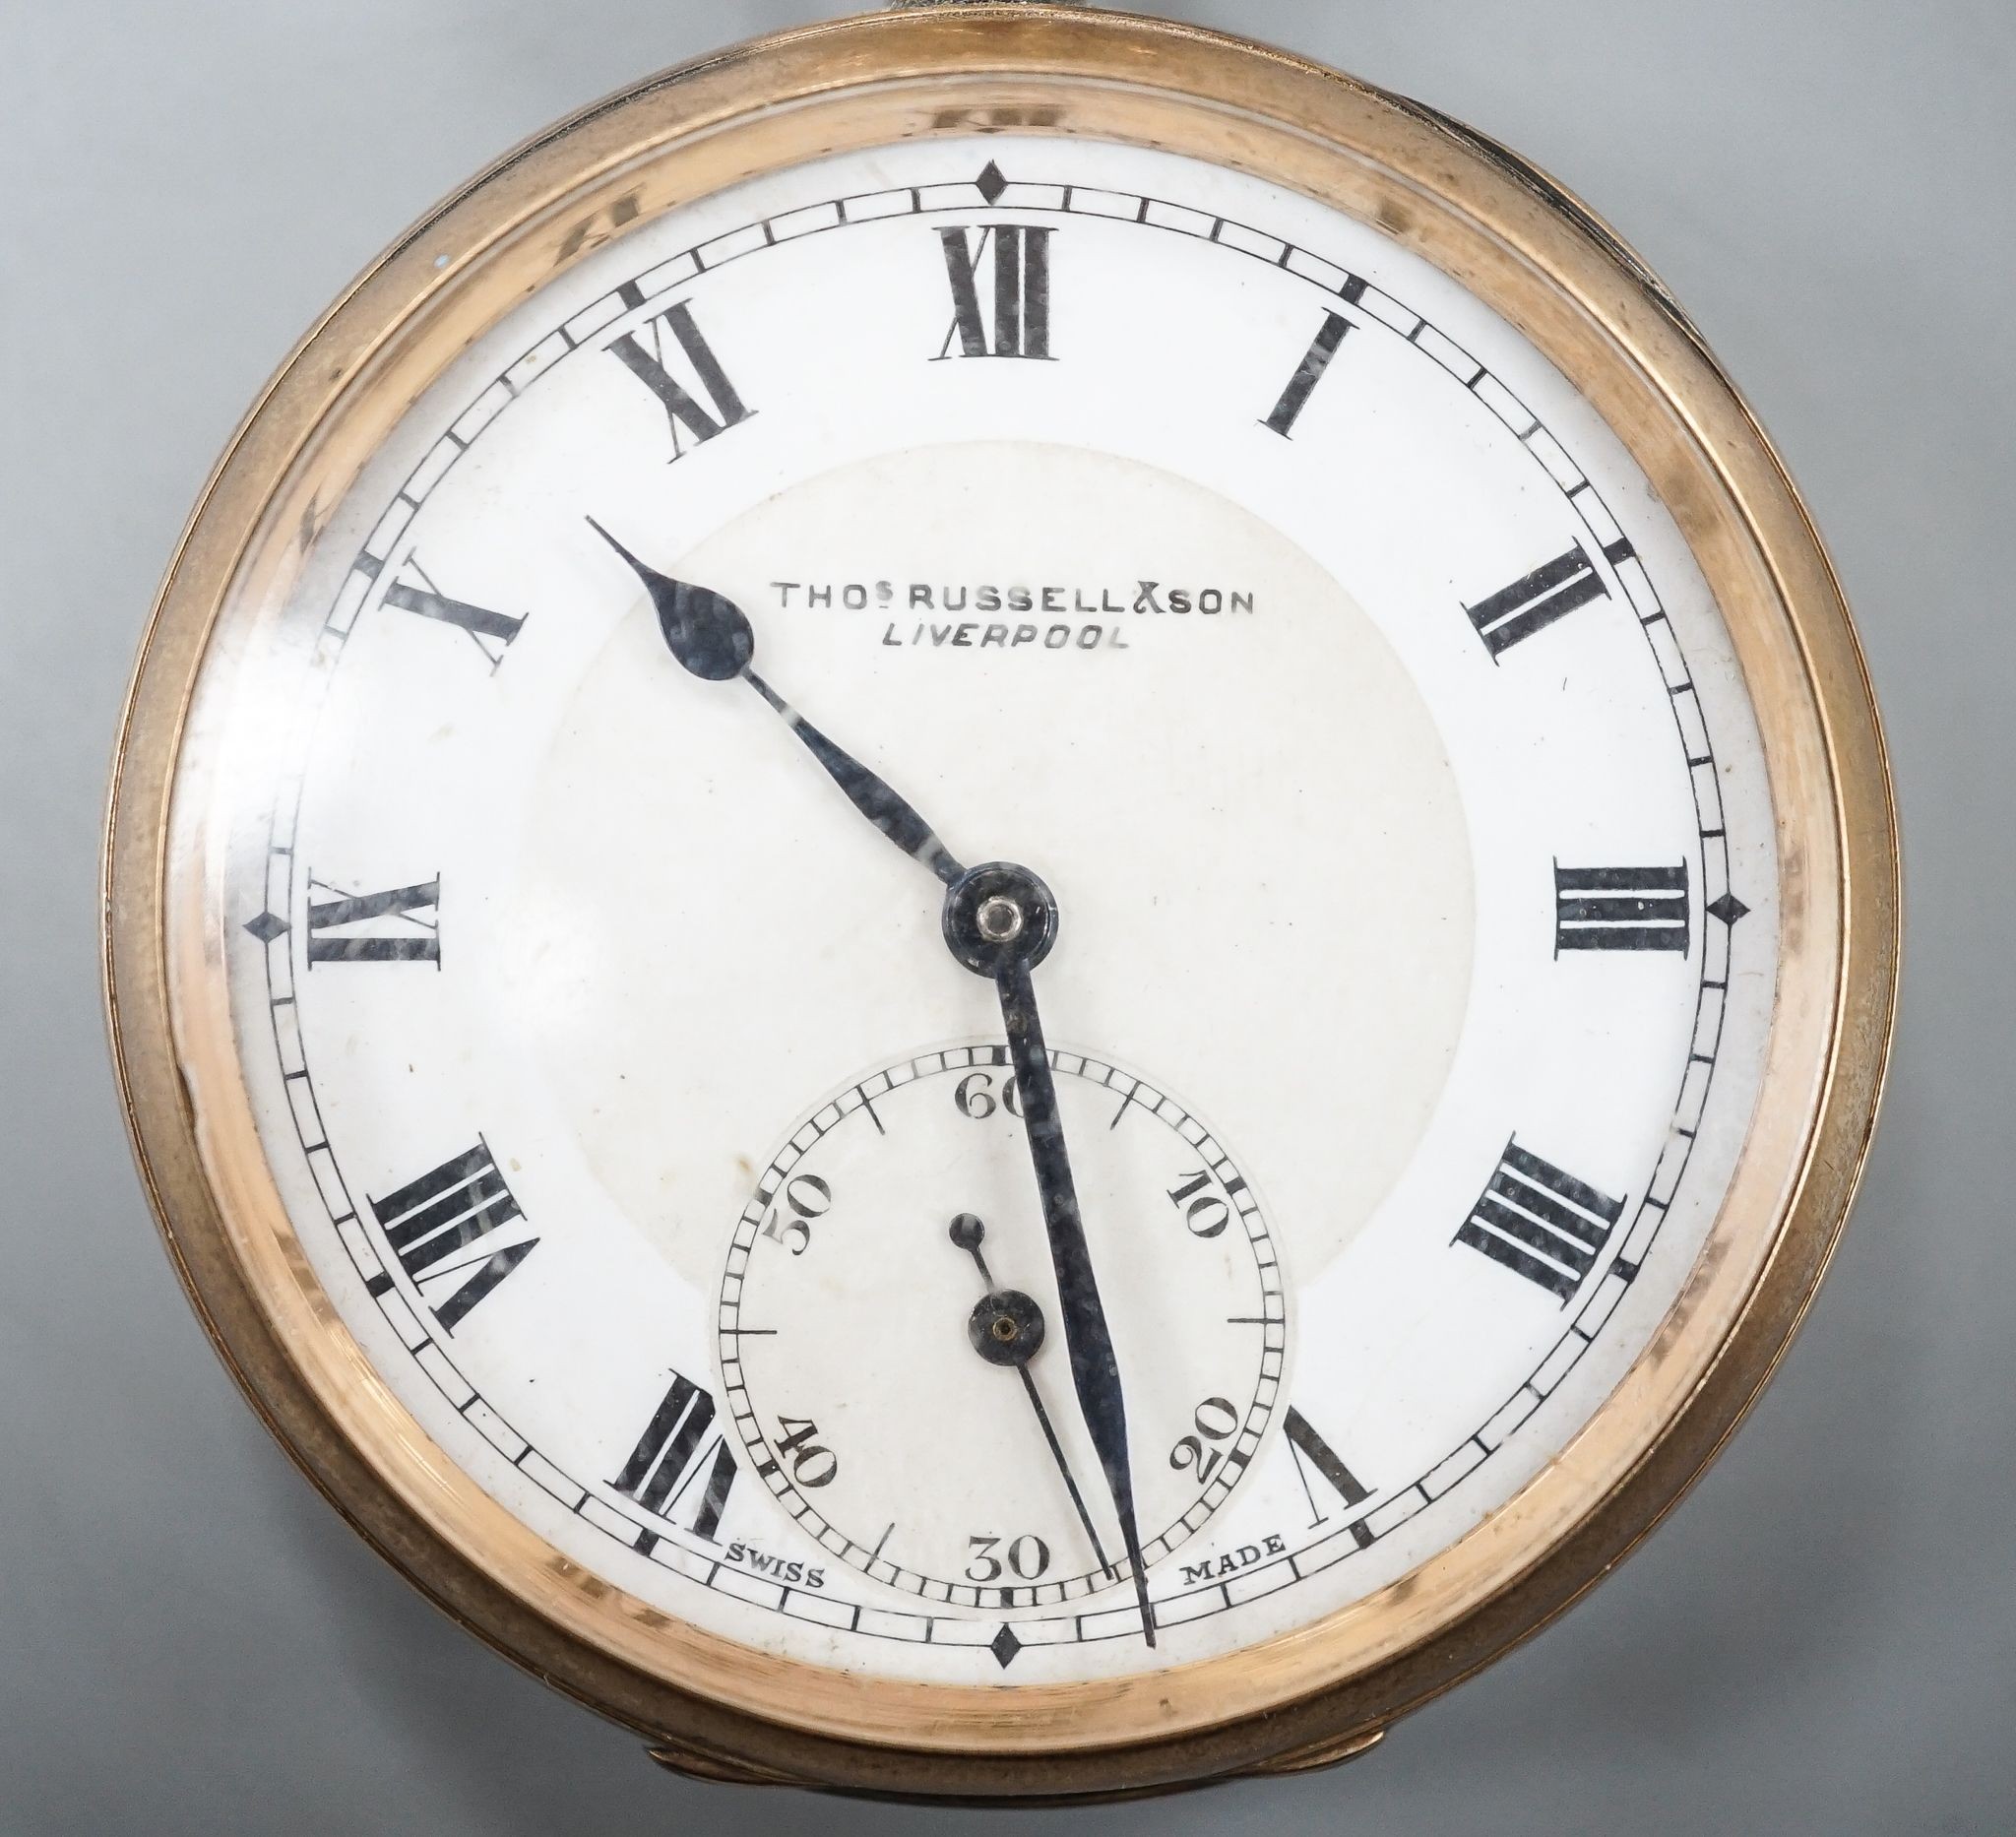 A George V 9ct gold open faced keyless pocket watch by Tomas Russell & Son, Liverpool, with Roman dial and subsidiary seconds, case diameter 49mm, gross weight 86.2 grams.